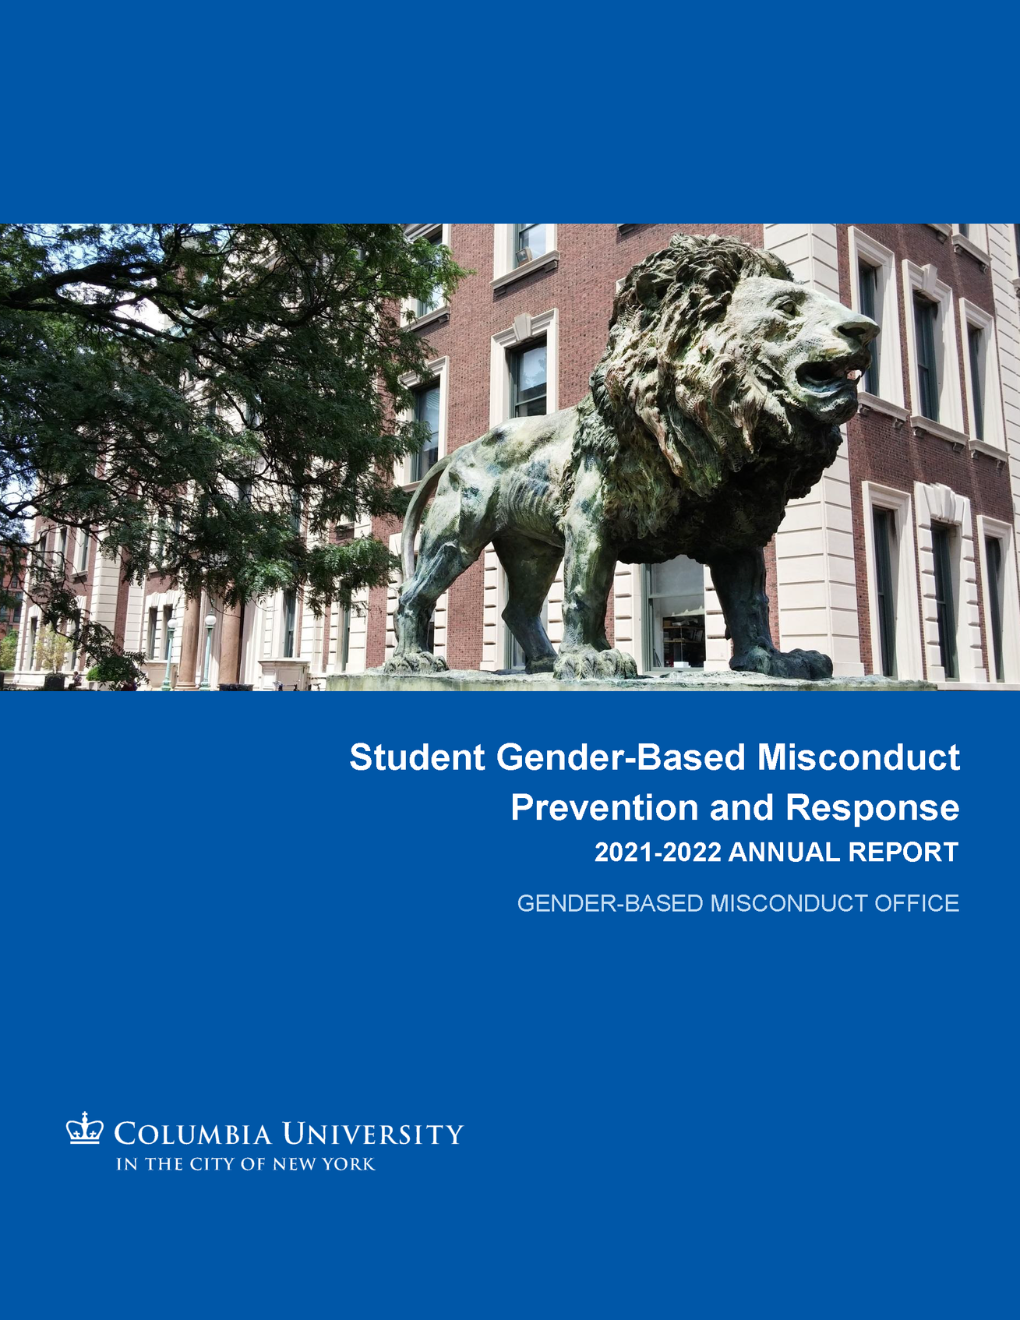 2021-22 Annual Report on Student Gender-Based Misconduct Prevention and Response Cover